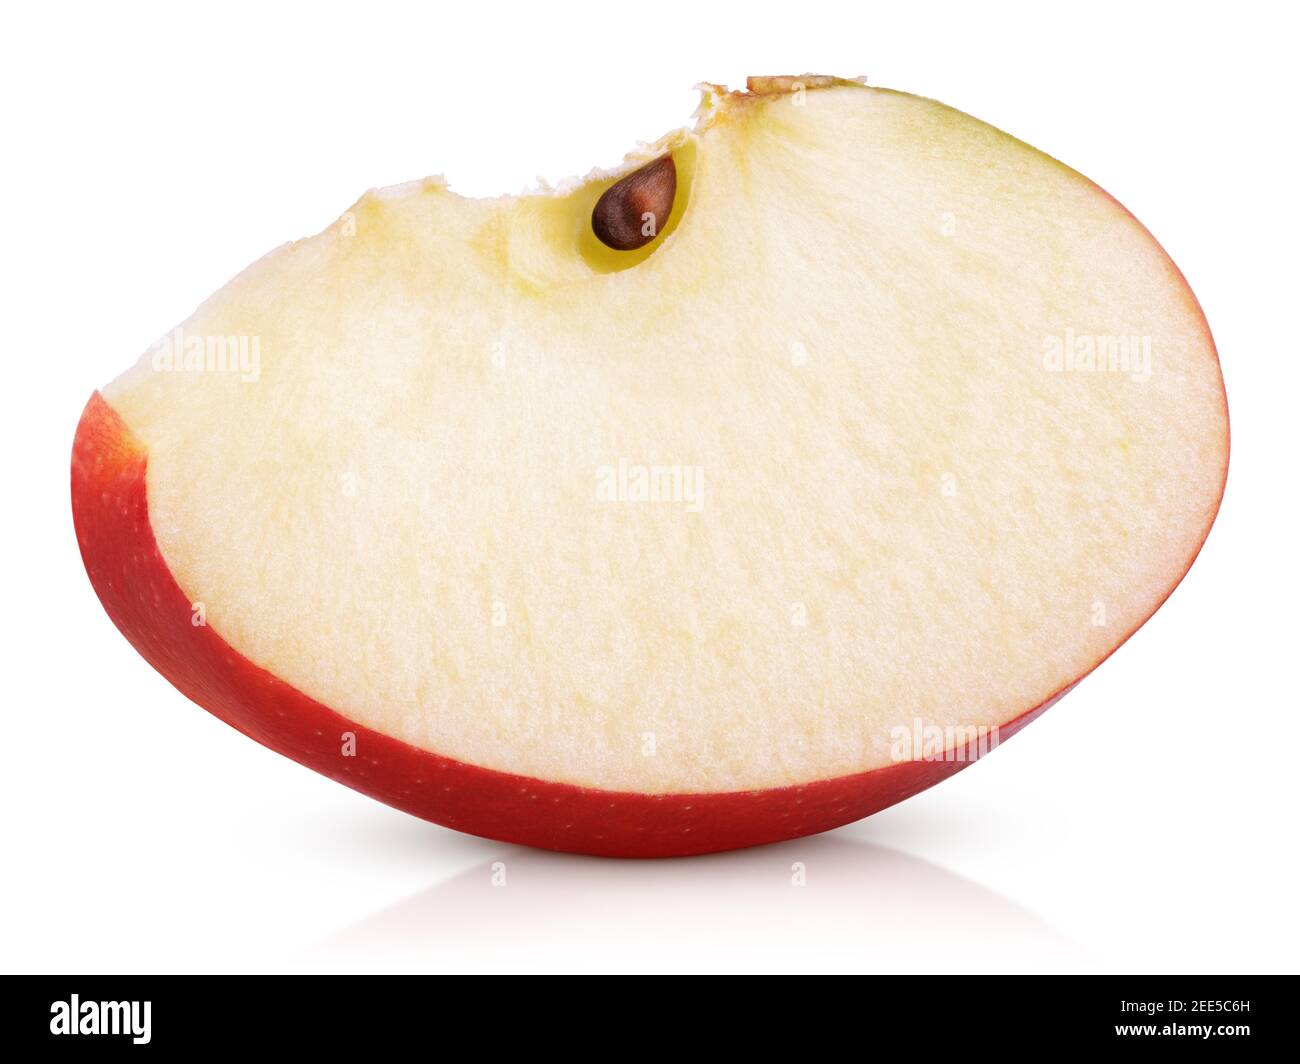 Red apple slice isolated on white background Stock Photo